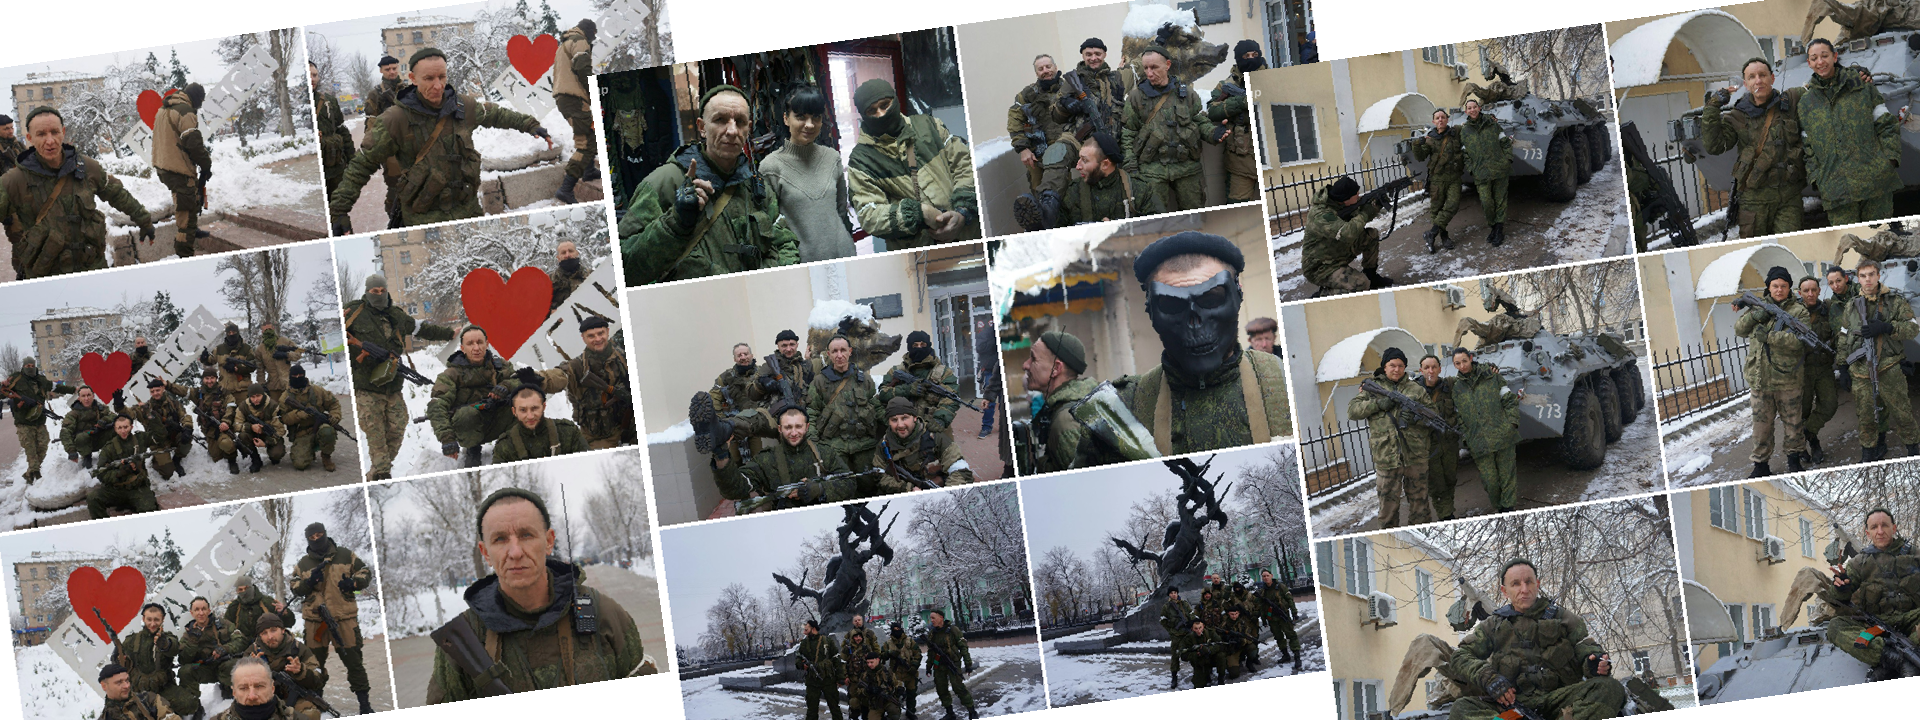 Chaos in Luhansk, Explained